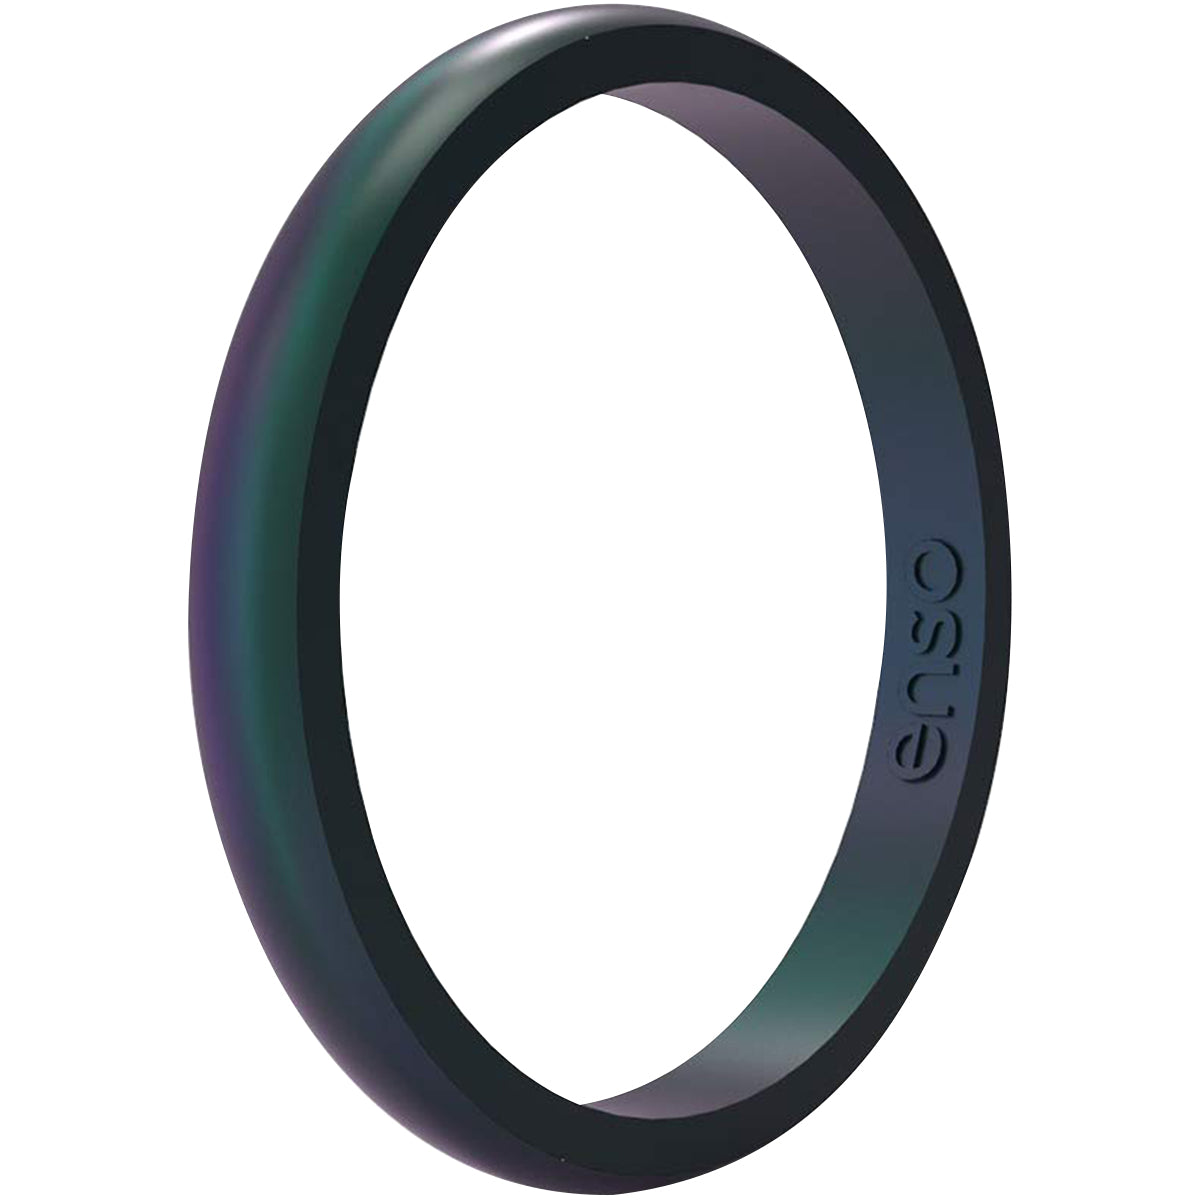 Enso Rings Halo Legends Series Silicone Ring - Mermaid Enso Rings